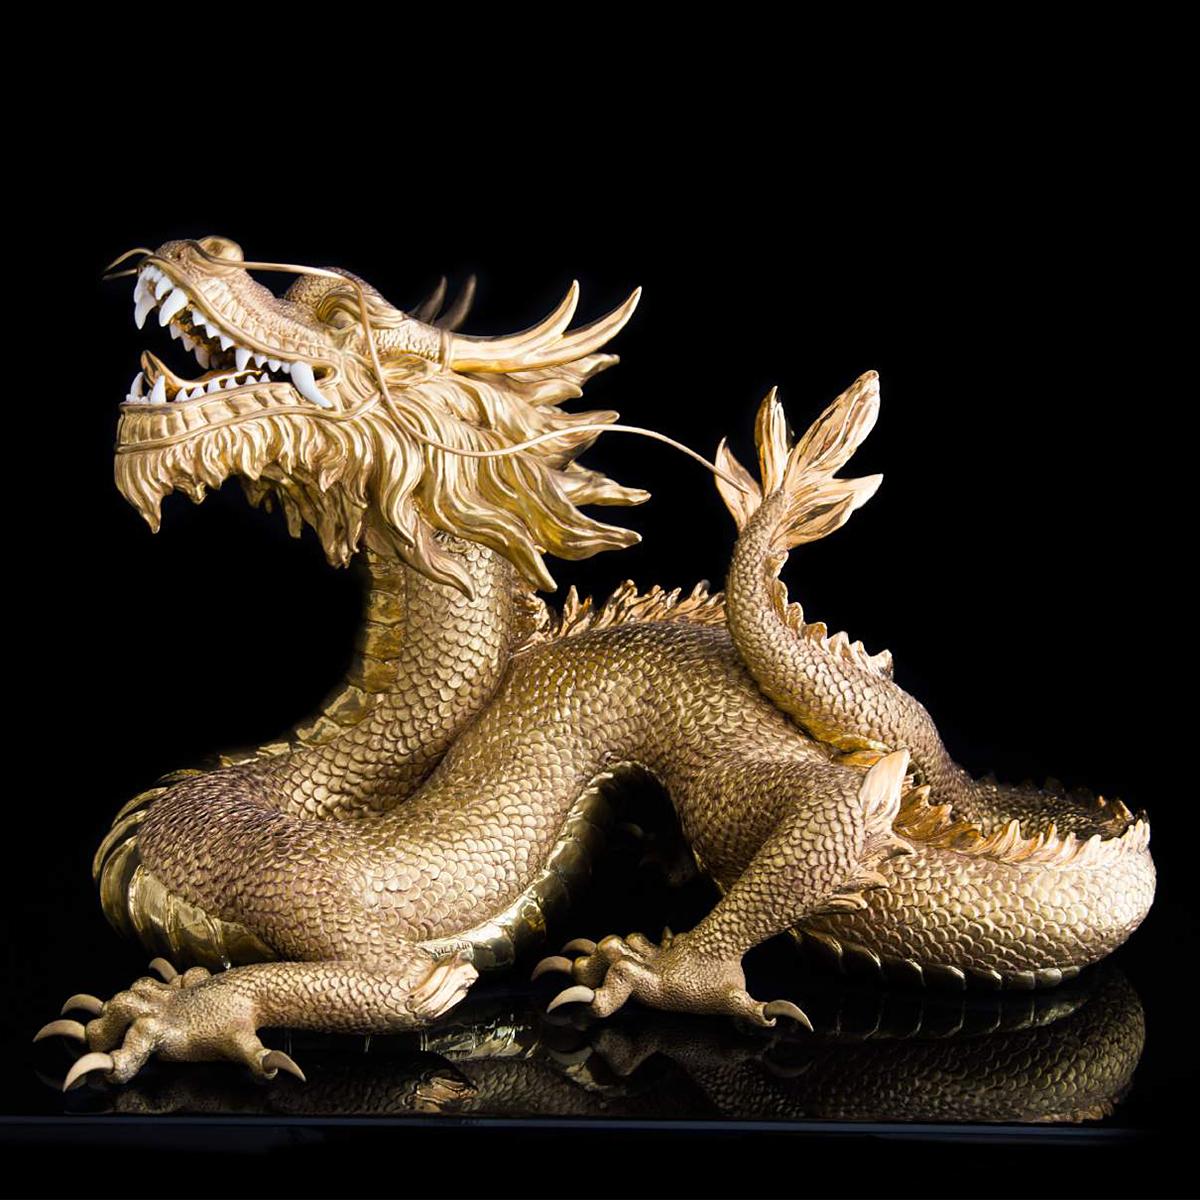 Sculpture gold dragon all made in
porcelain and gold-plated in 24-karat.
With gold-plated polished brass whiskers.
Exceptional piece.